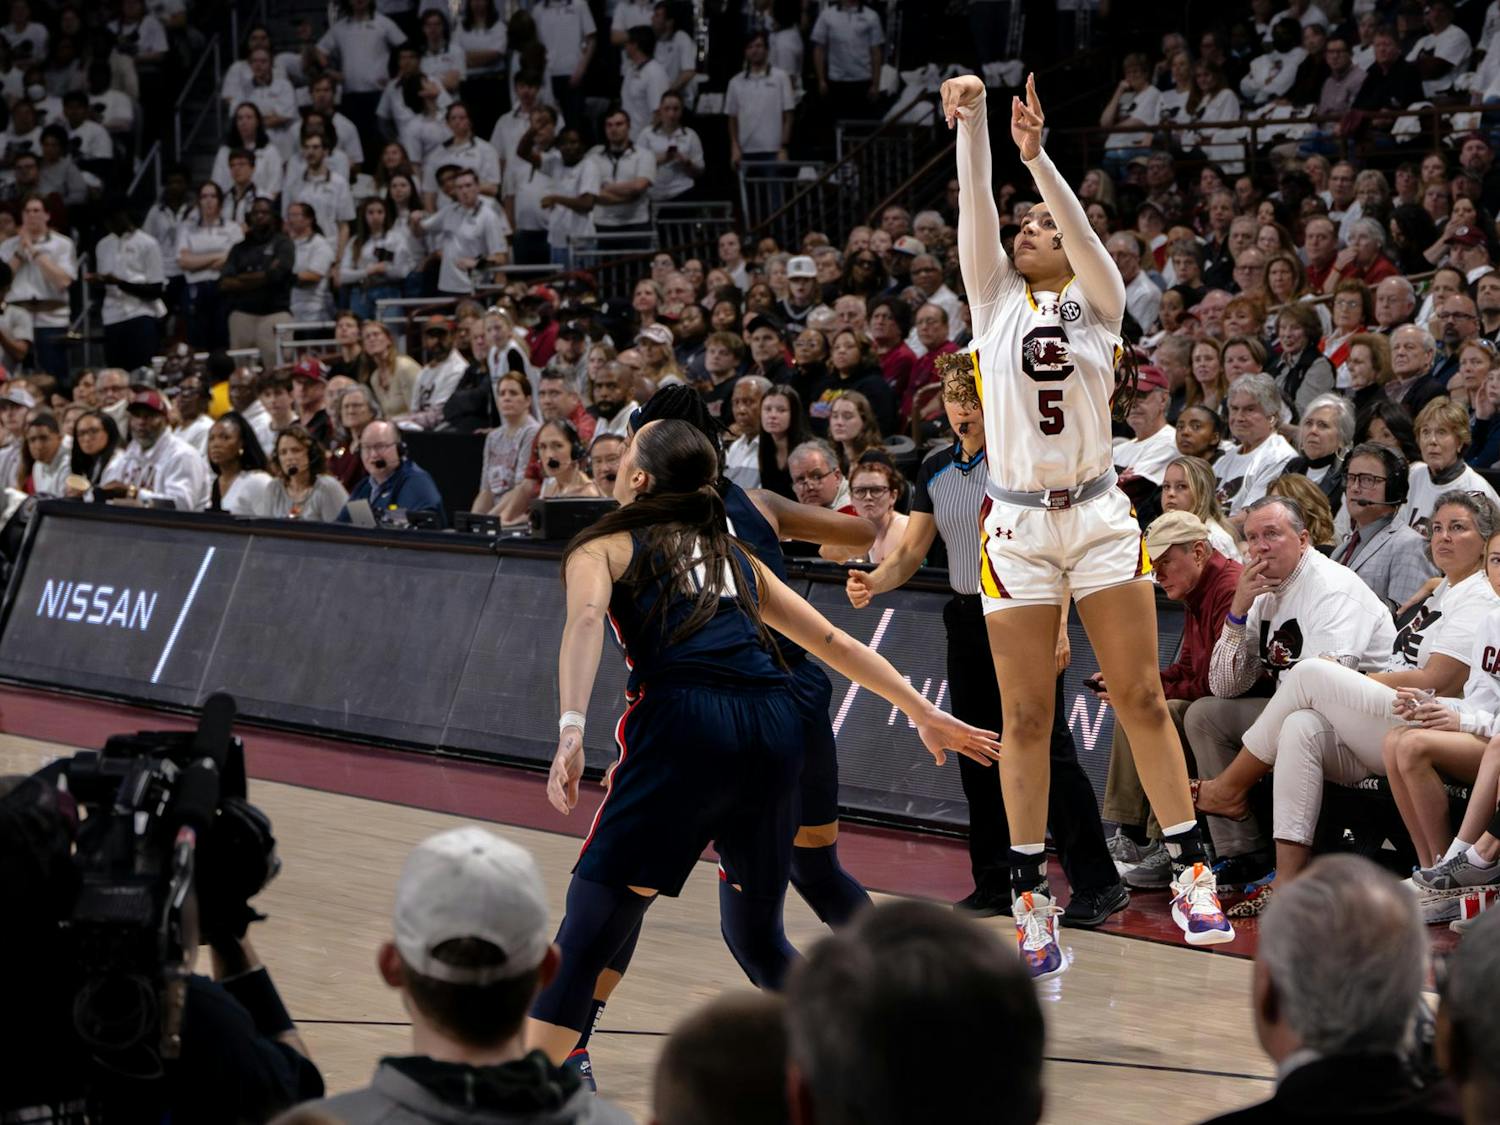 Freshman guard Tessa Johnson attempts a 3-point shot during the Gamecocks' 83-65 victory over the Huskies on Feb. 11, 2024. Johnson scored 9 points for the Gamecocks during her 15 minutes playing at Colonial Life Arena.